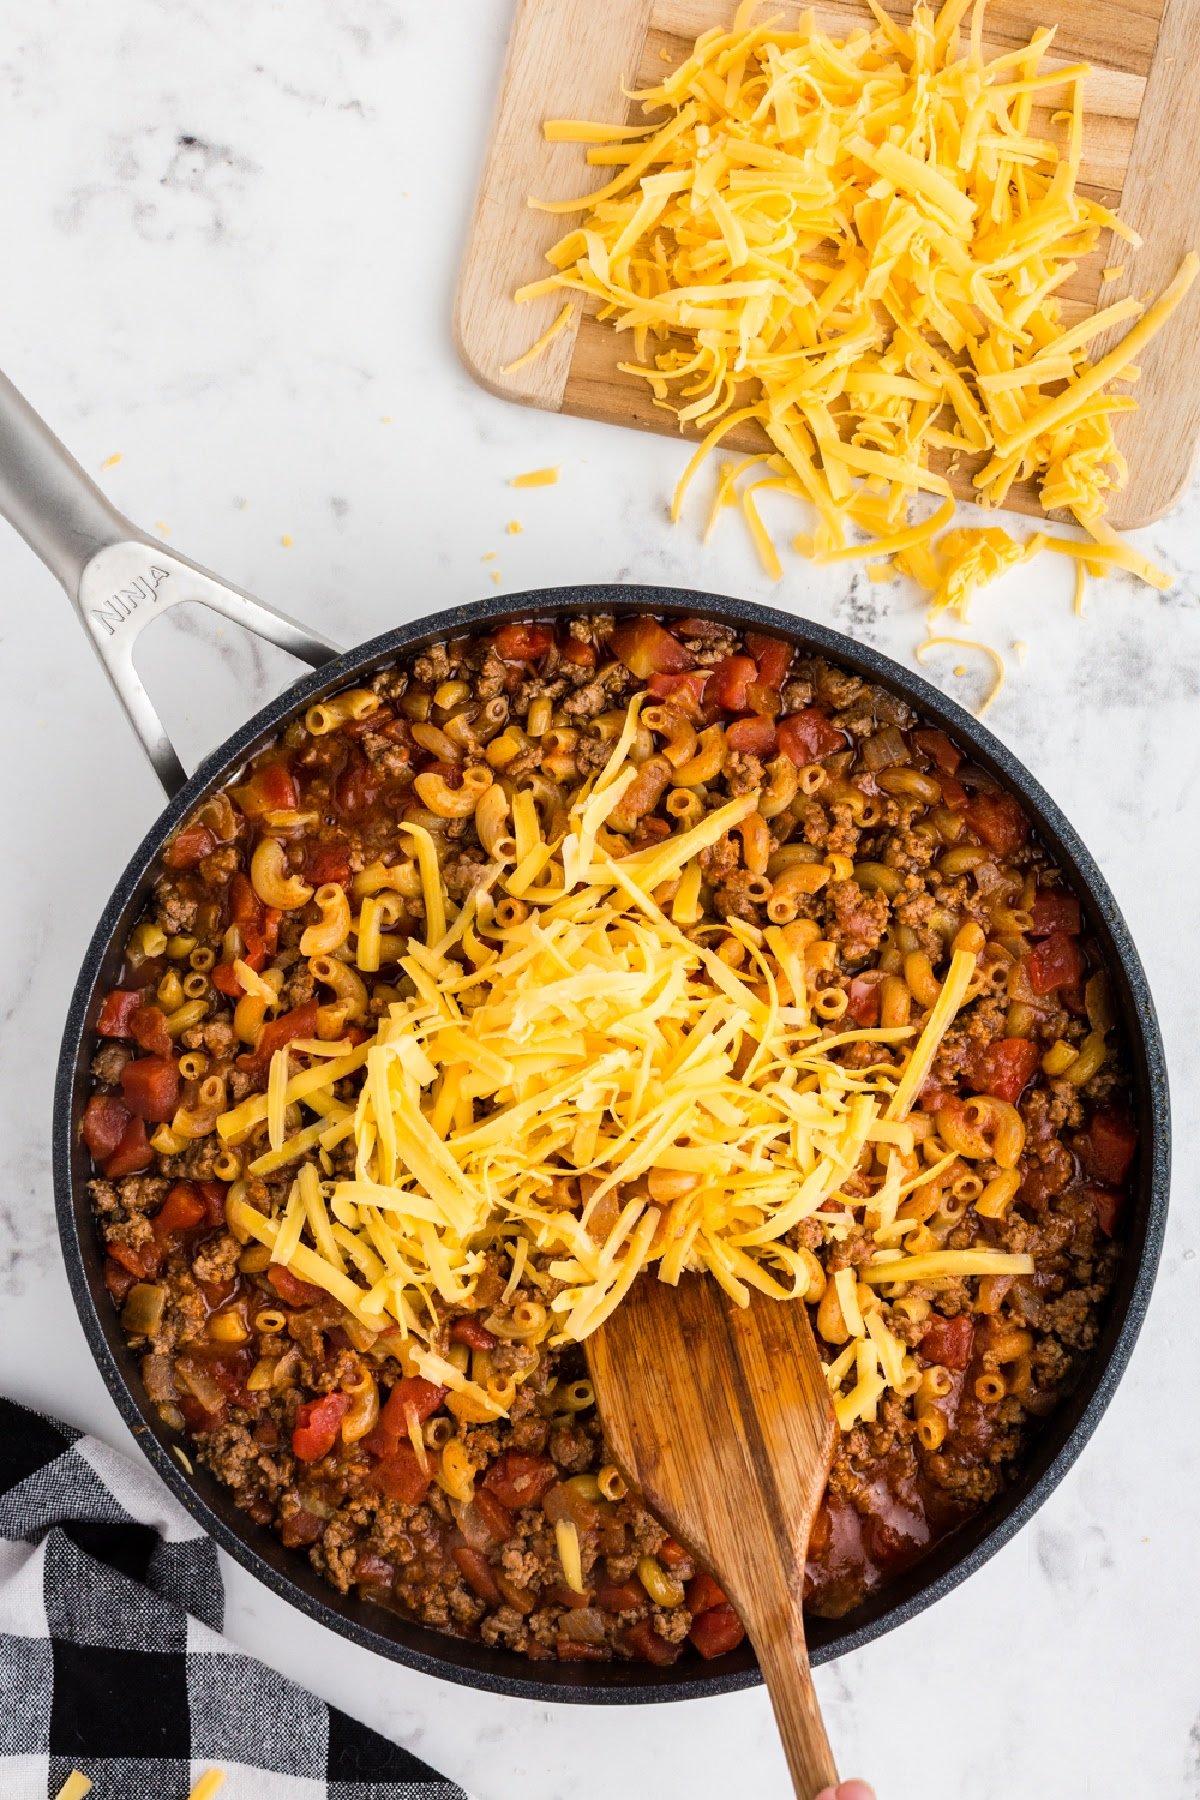 Stirring pile of cheese into the chili mac in skillet.